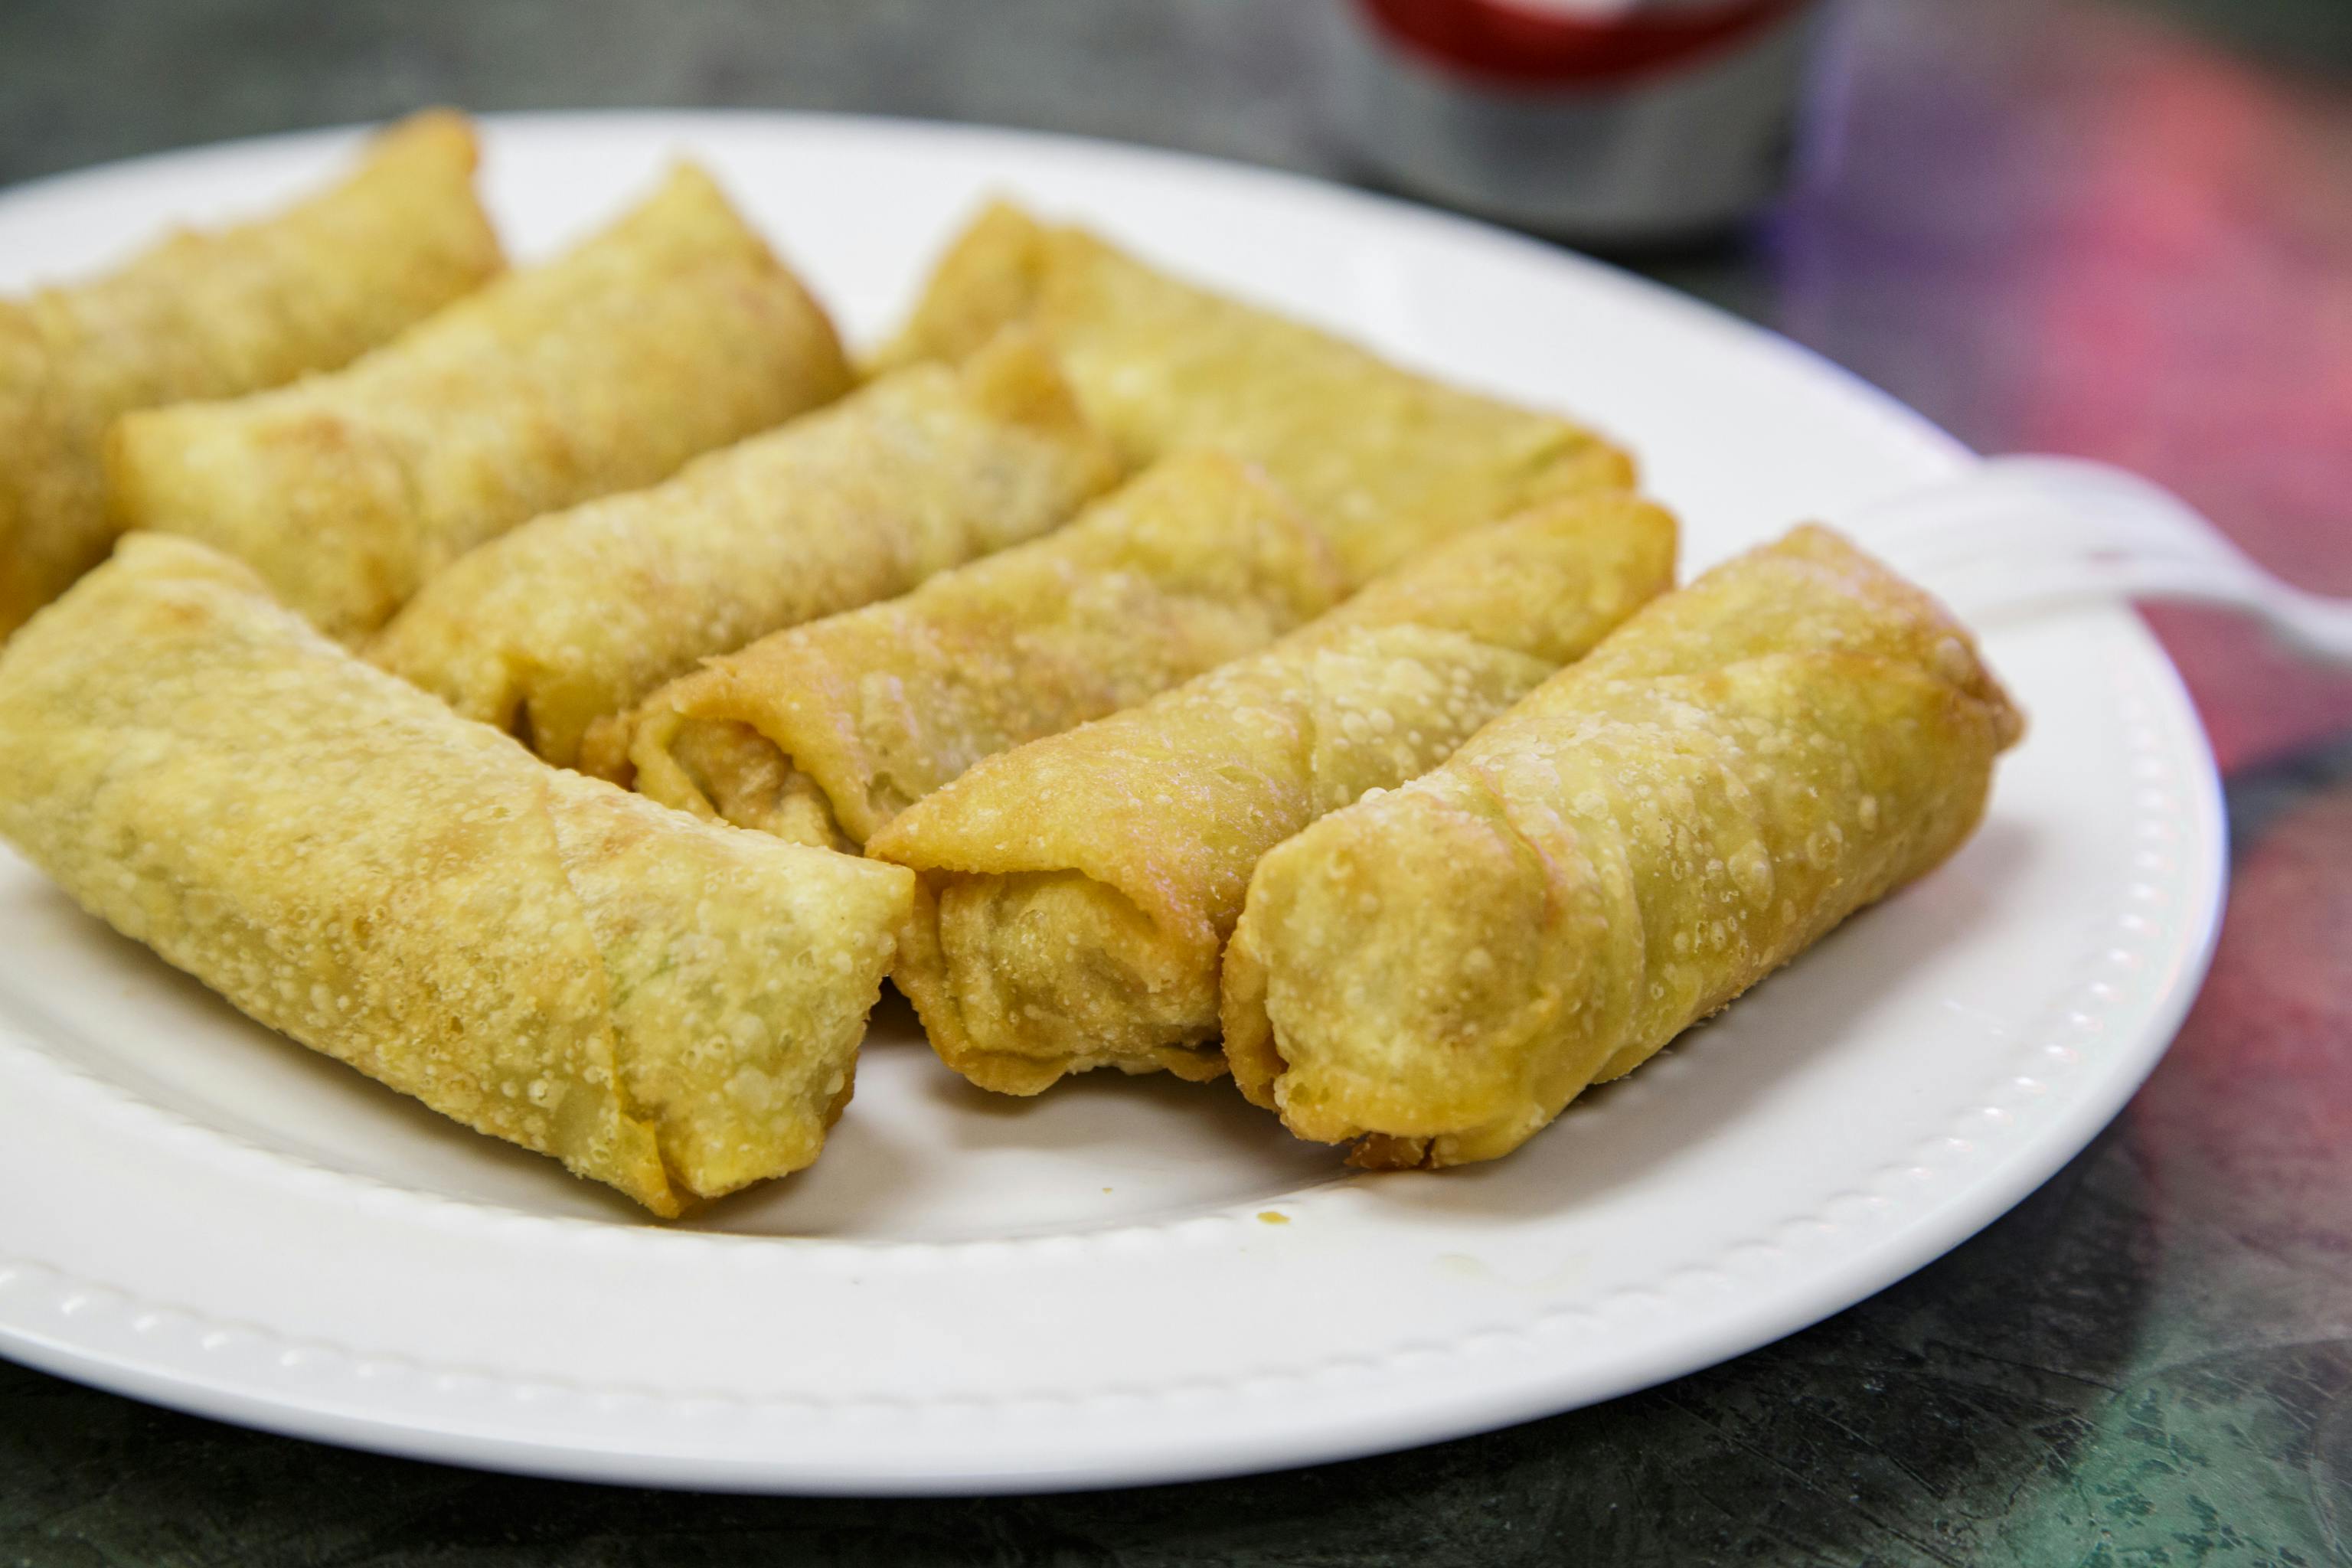 1. Roast Pork Egg Roll (1 Pieces) from China Wok in Madison, WI